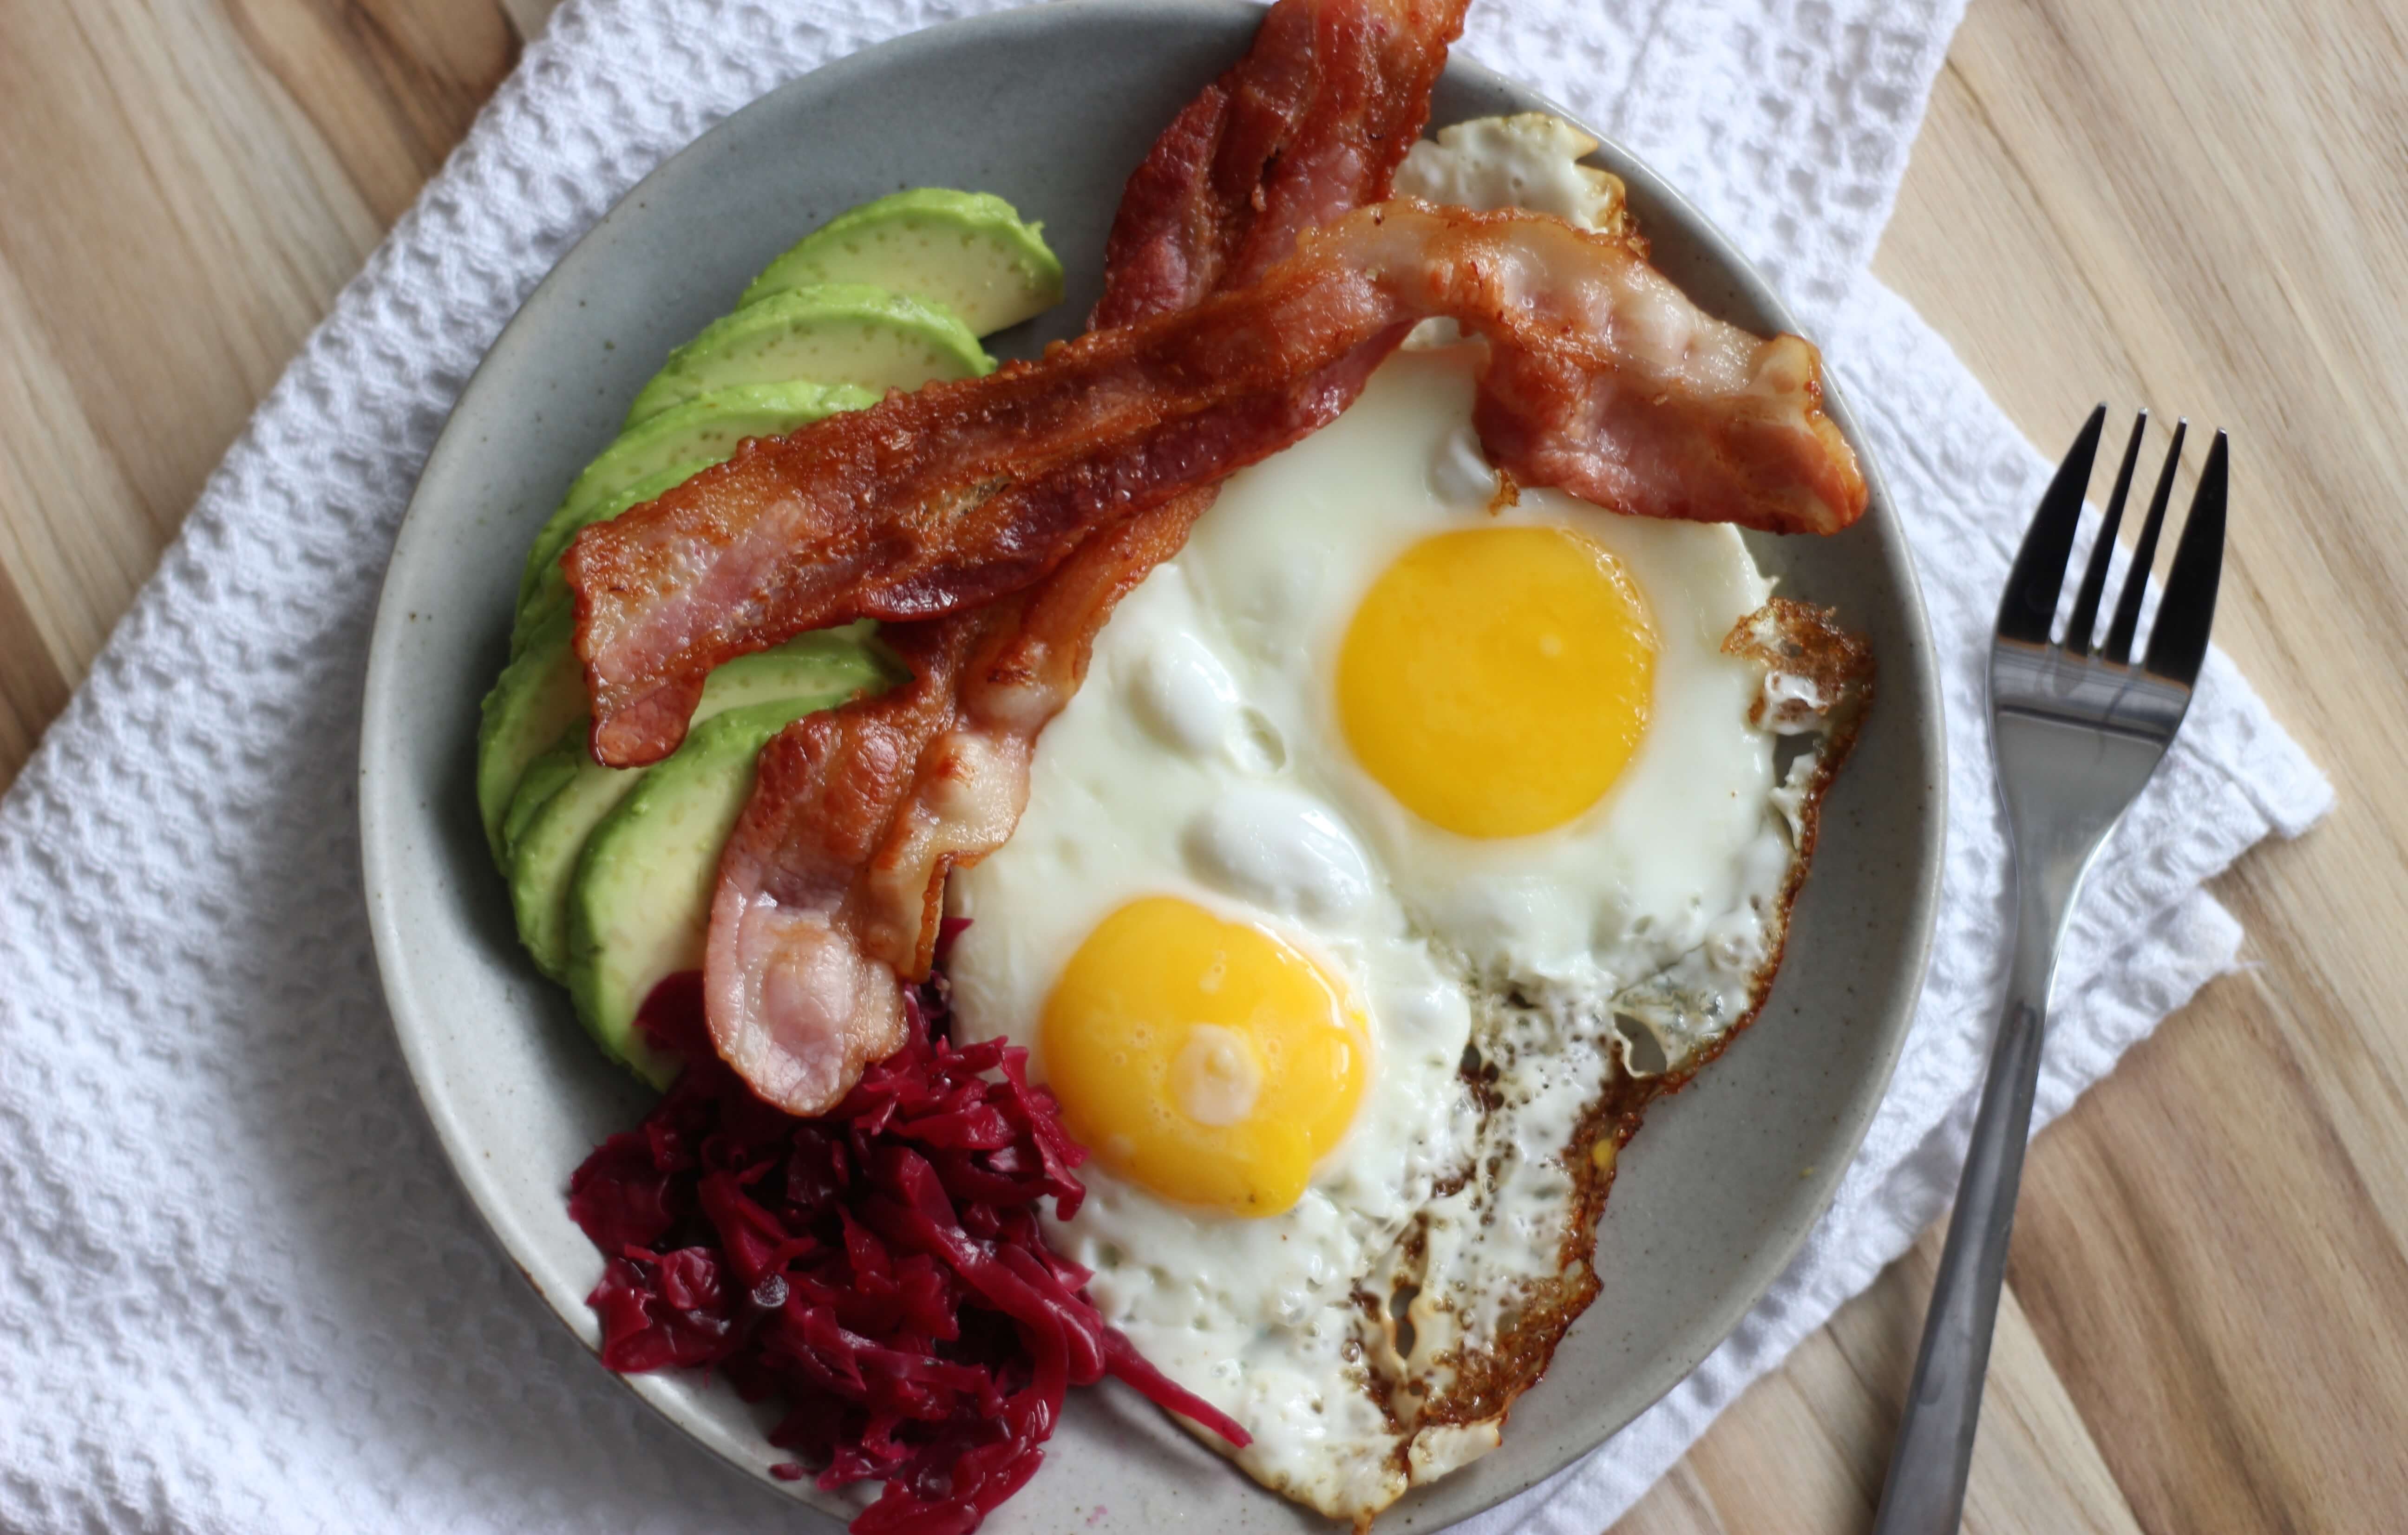 20 Low Oxalate Meals Your Clients Will Love: Bacon, Eggs, Avocado & Sauerkraut